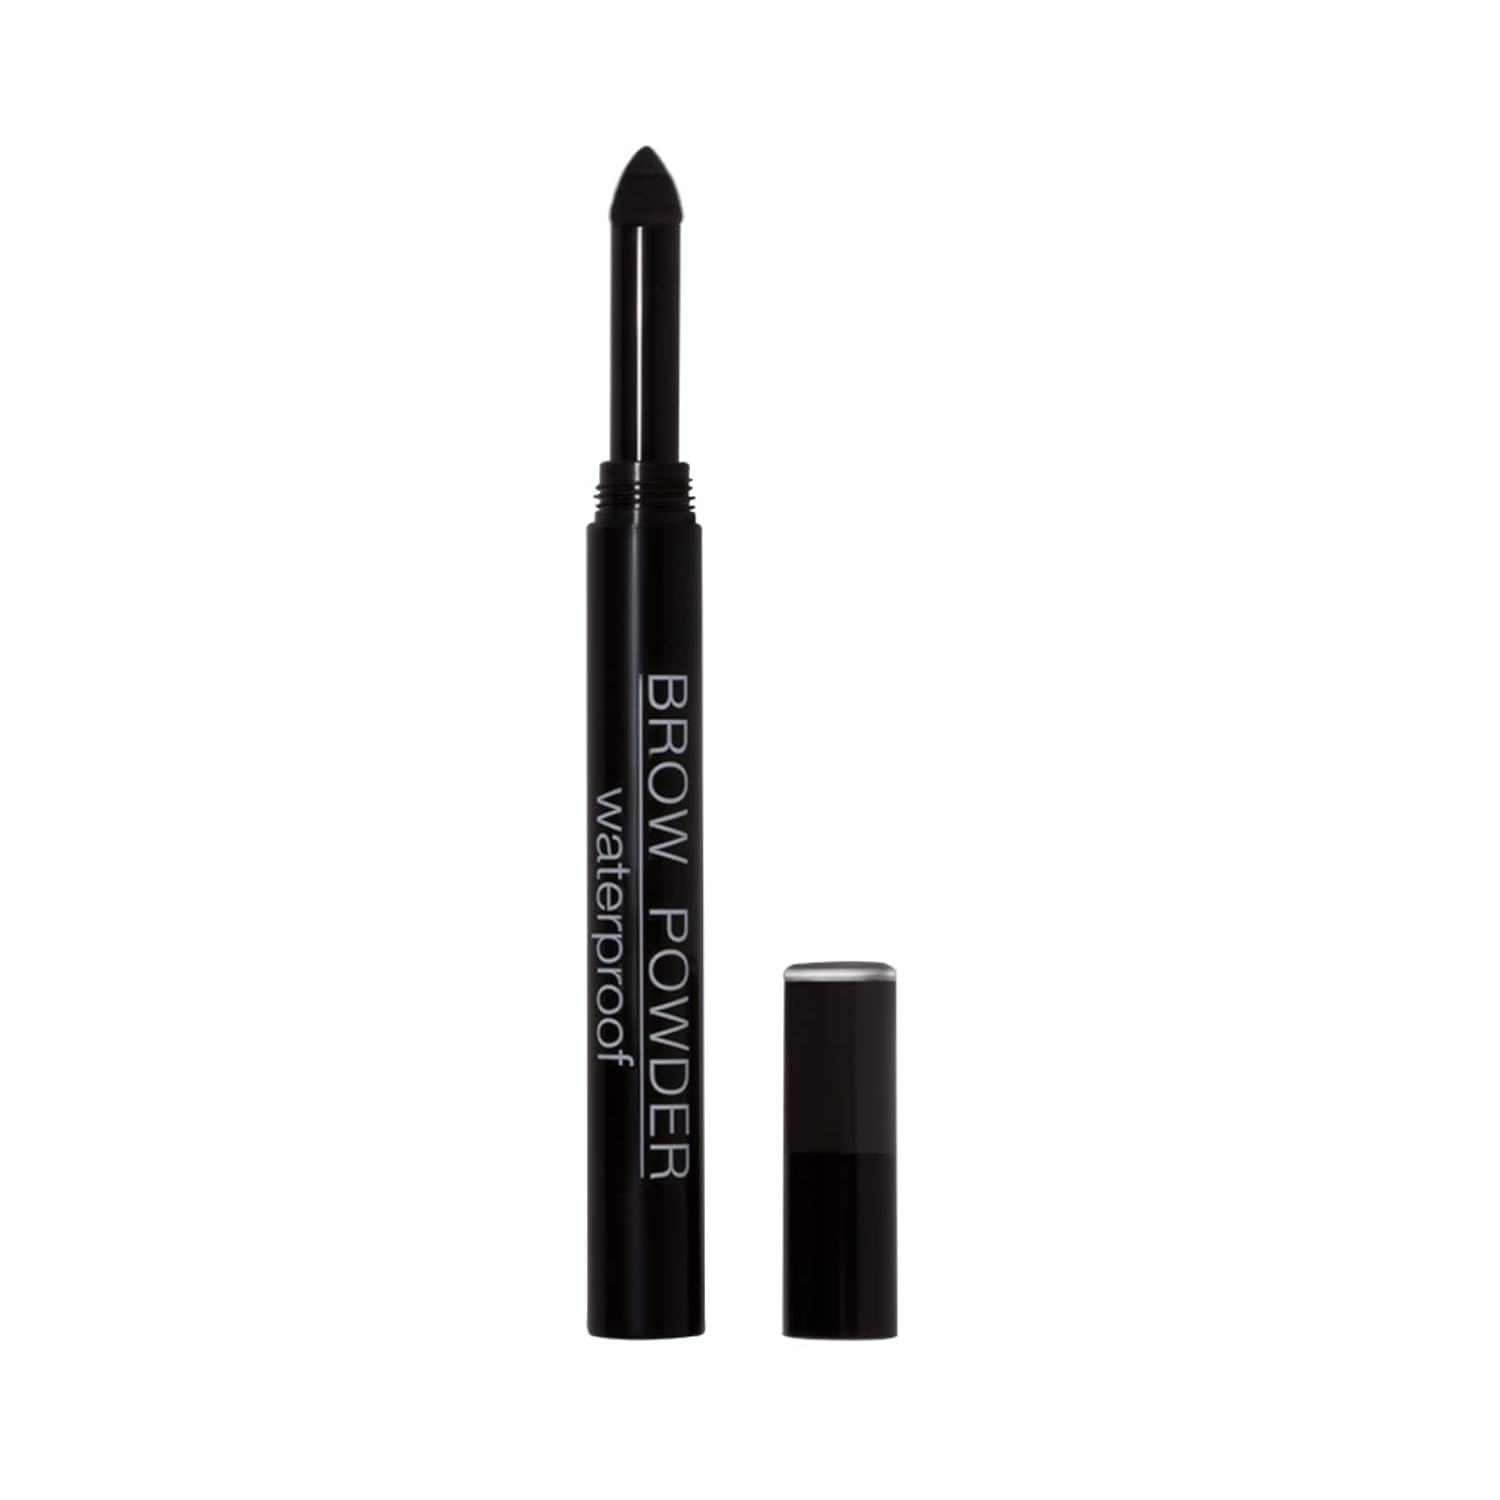 Nouba Waterproof Black Brow Powder Pencil - Long Lasting Eyebrow Definer Makeup Filler Compact Pomade Stick Eye Shadow For Tinting, Sculpting, Contouring, Full, Defined, Buildable Eyebrows (Color 4)